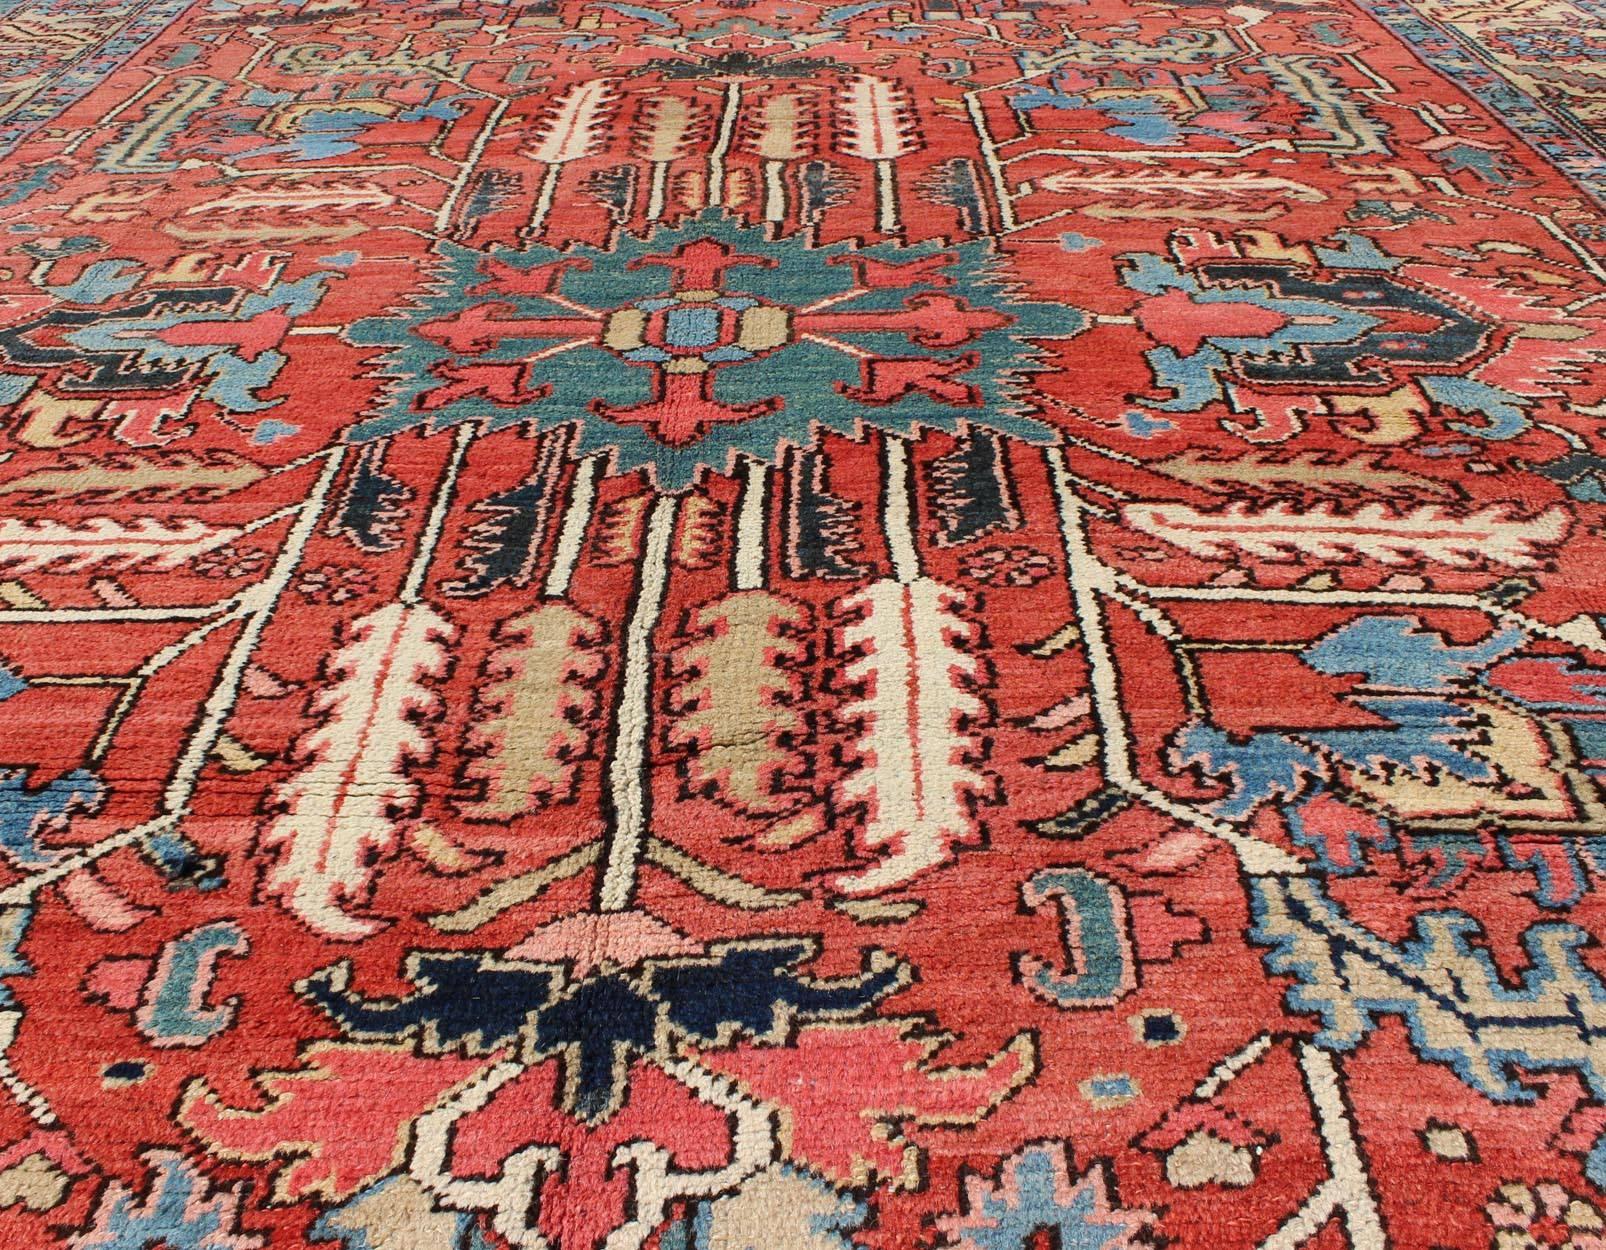 Antique All Over Serapi Goravan Rug in Soft Red, Yellow, L. Blue & L. Green In Excellent Condition For Sale In Atlanta, GA